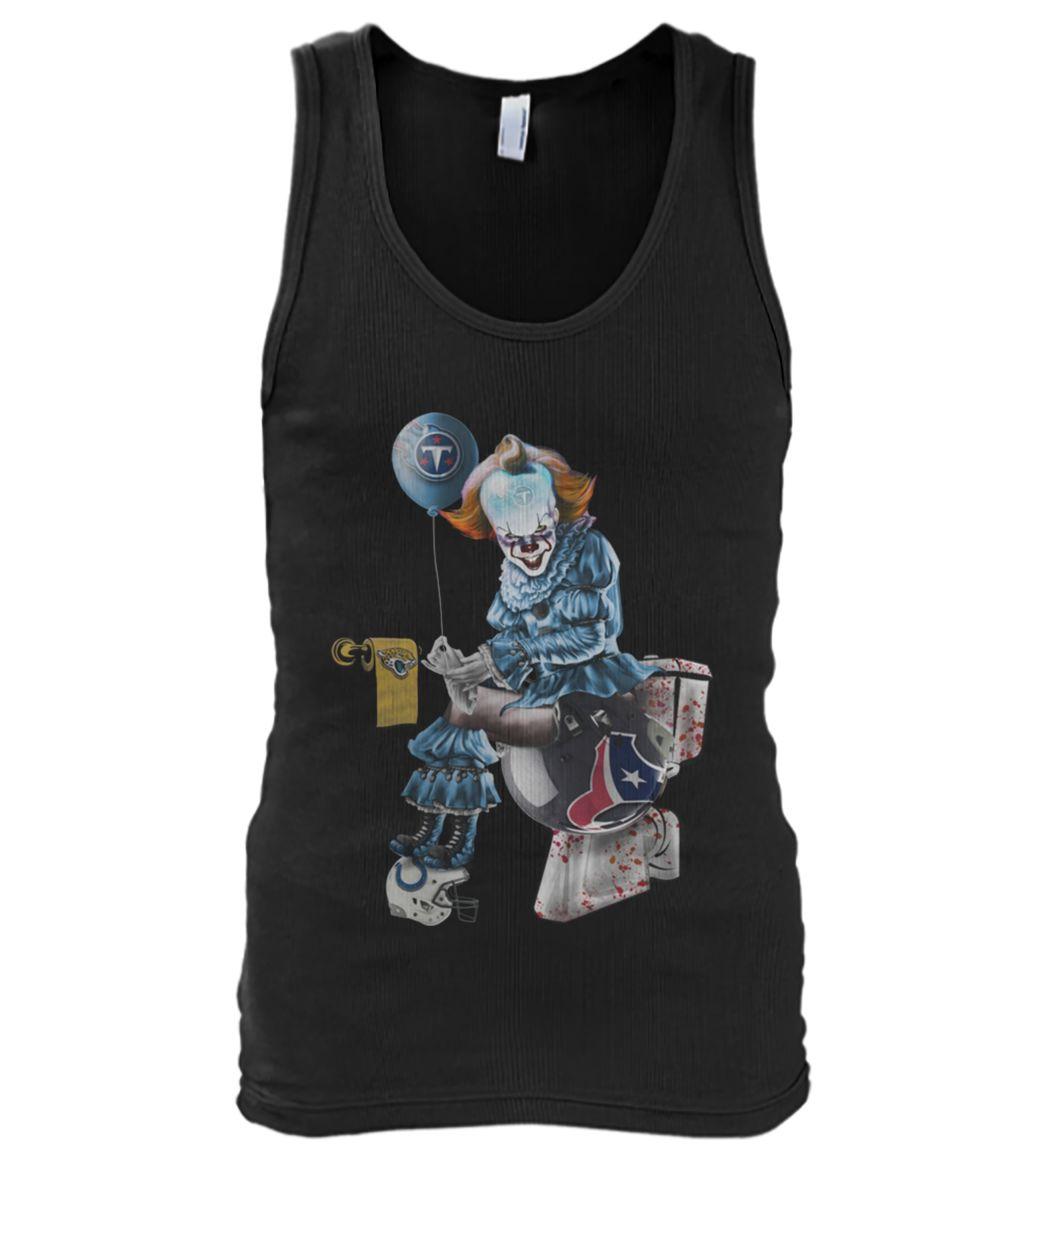 It pennywise tennessee titans sitting on houston texans tank top